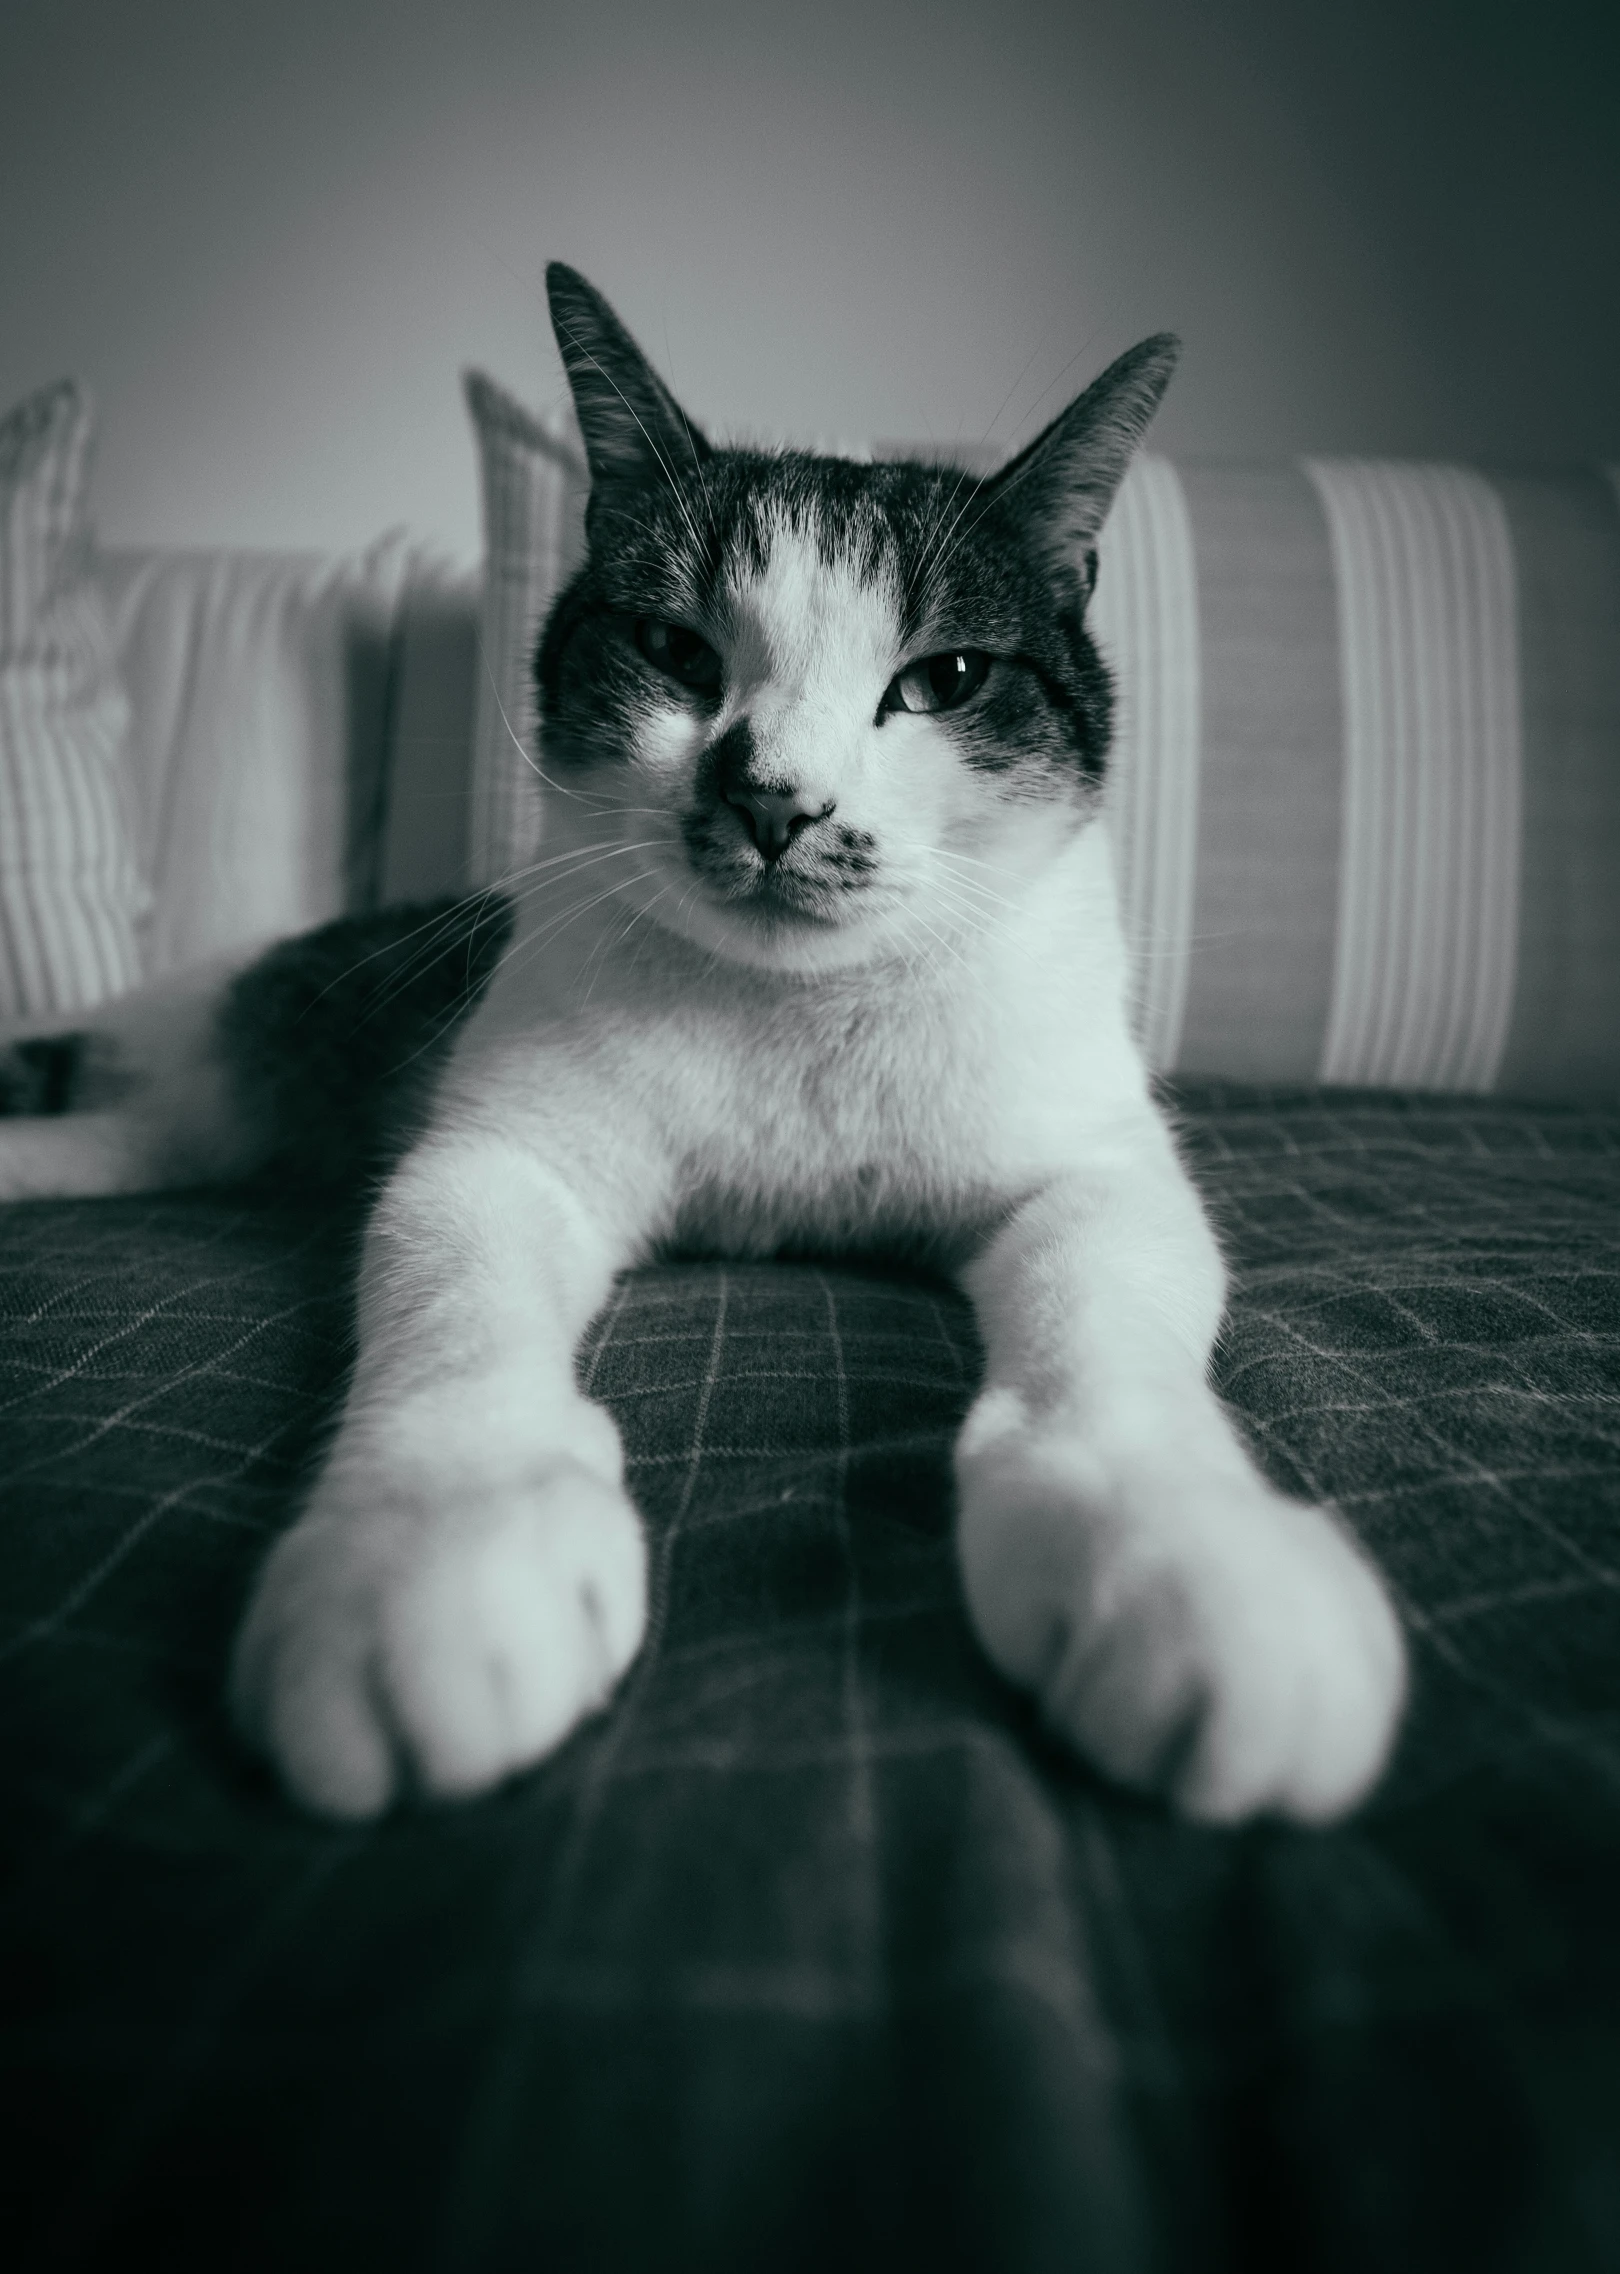 black and white po of cat on bed with pillows in background